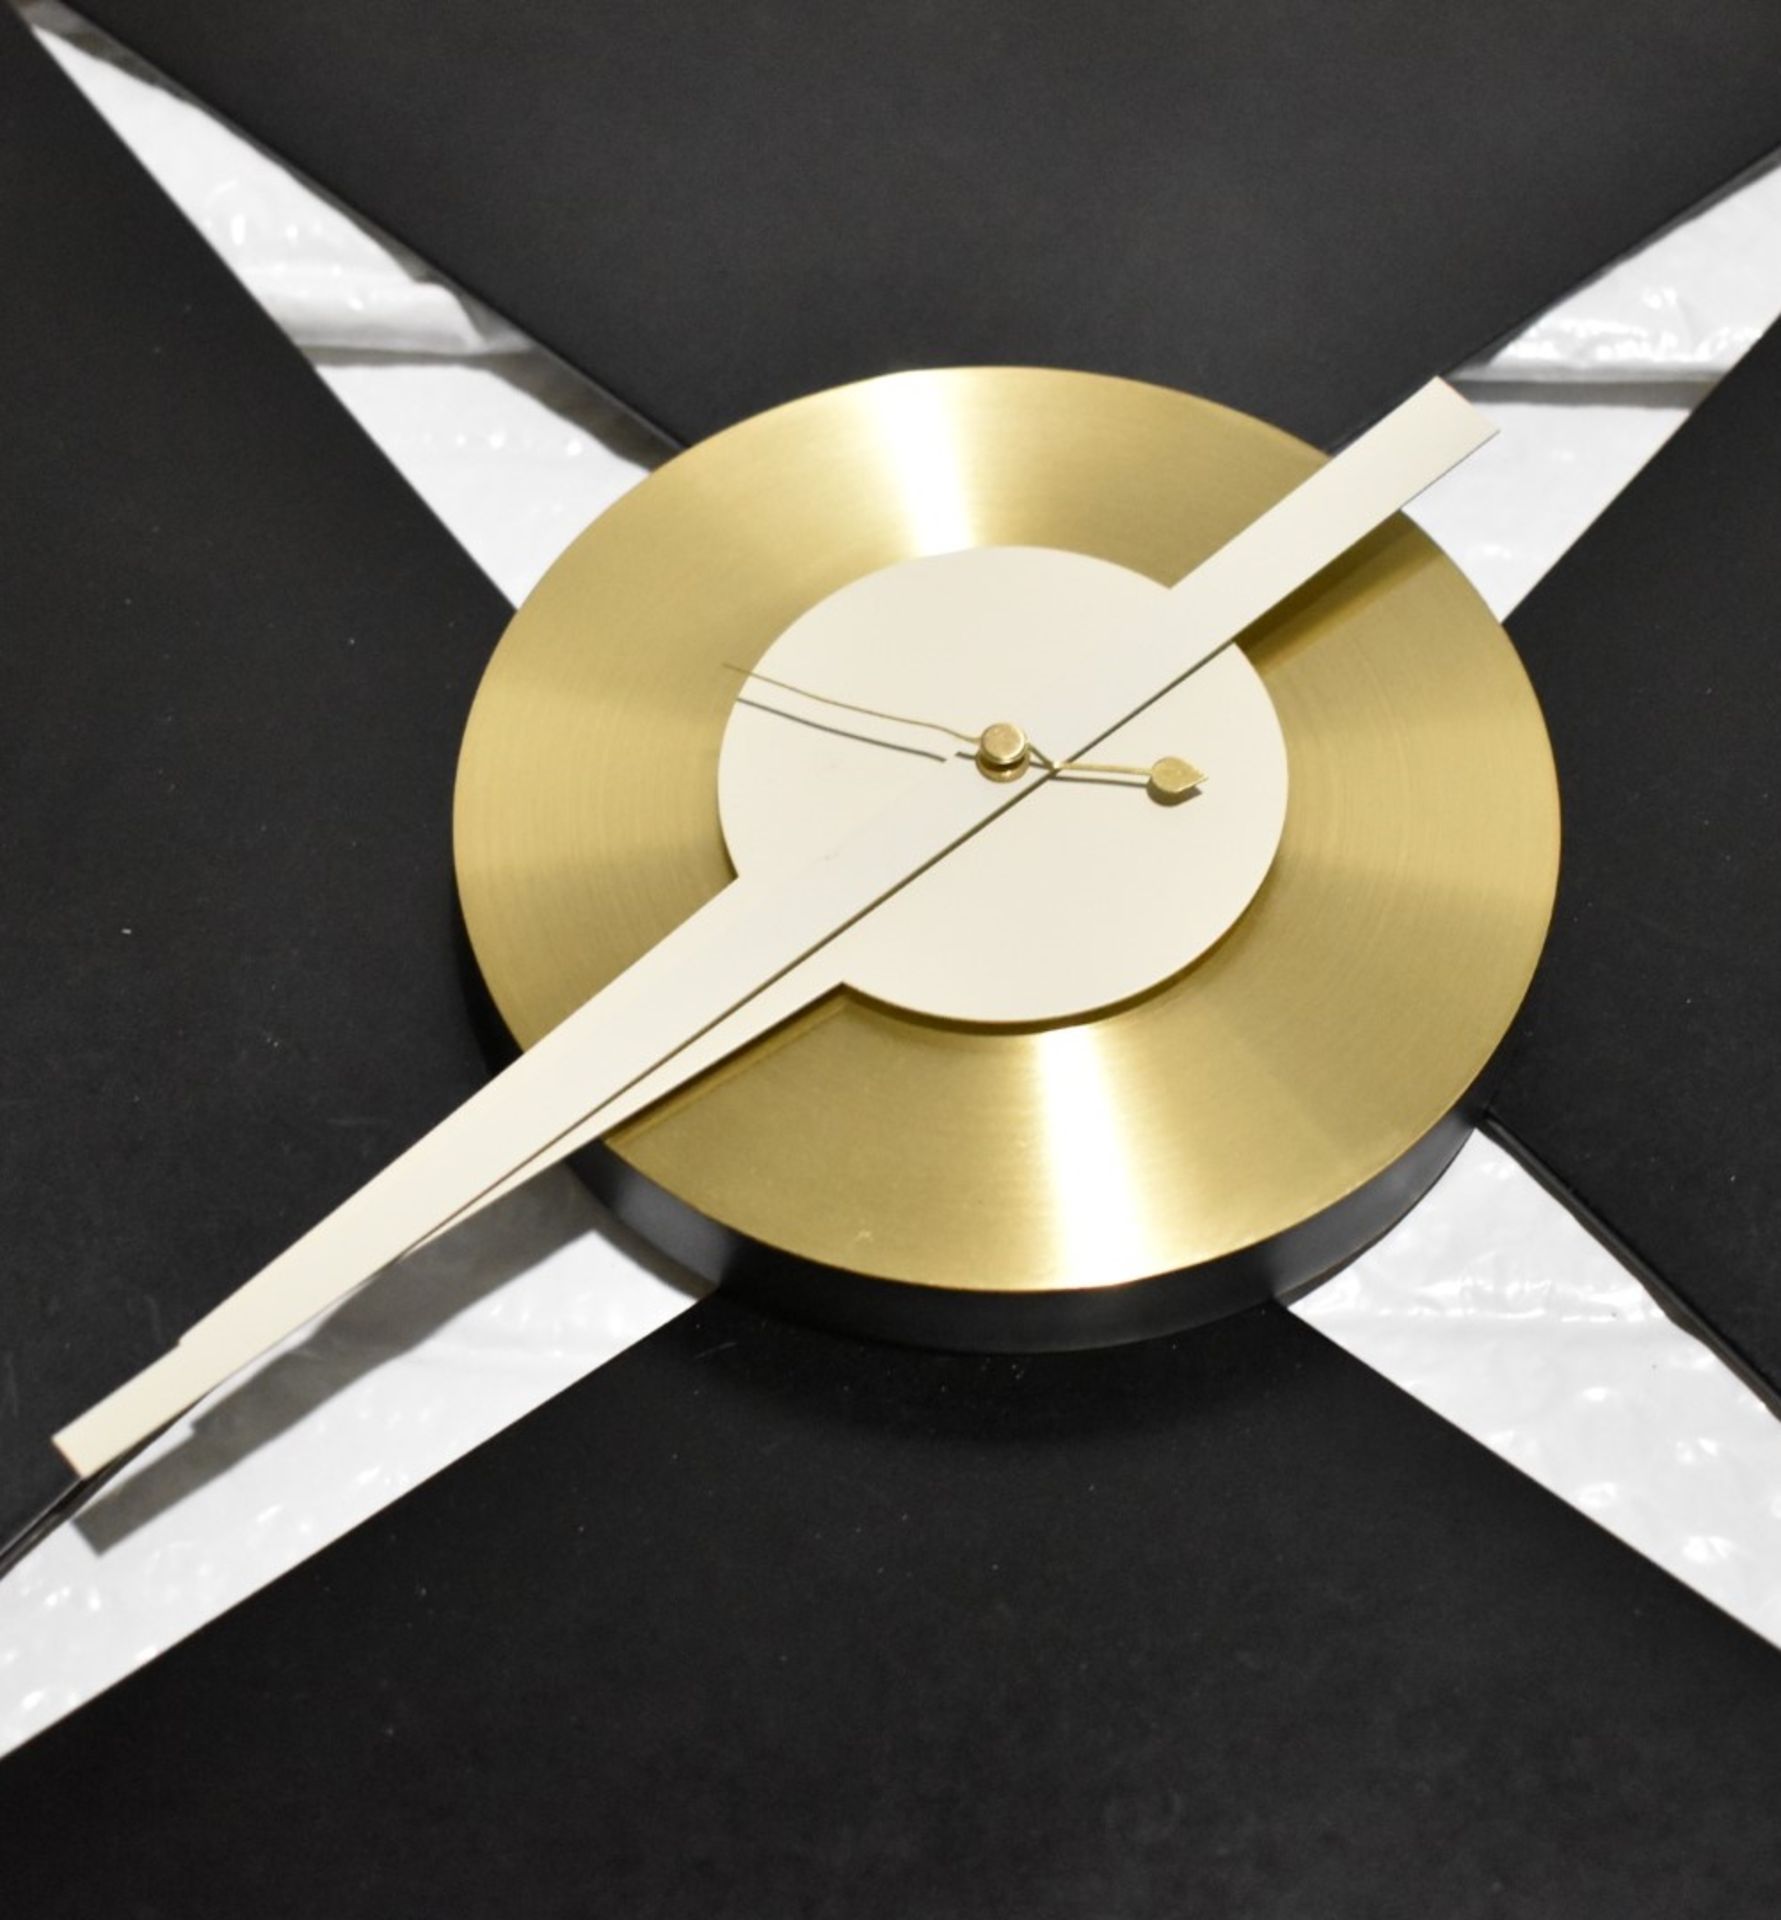 1 x VITRA George Nelson 'Petal' Designer Wall Clock in Black and Brass - Original Price £389.00 - Image 3 of 5